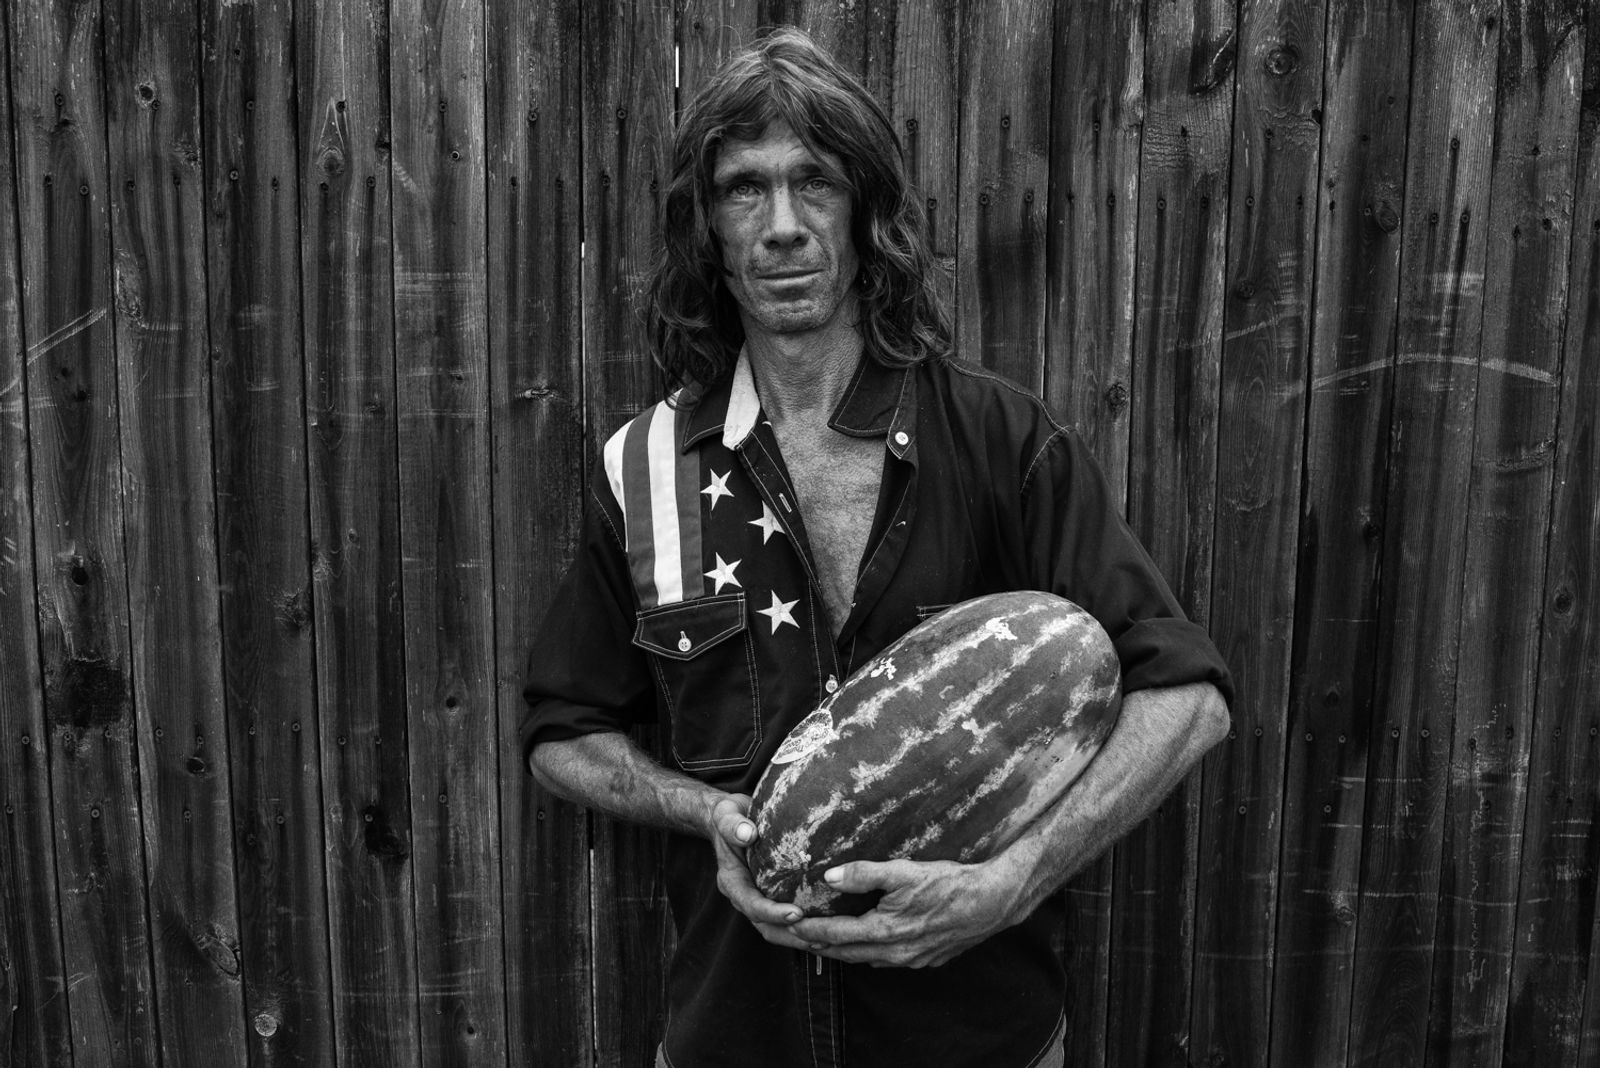 © Richard Sharum - A man holds a watermelon given to him by a local food bank. 2018.